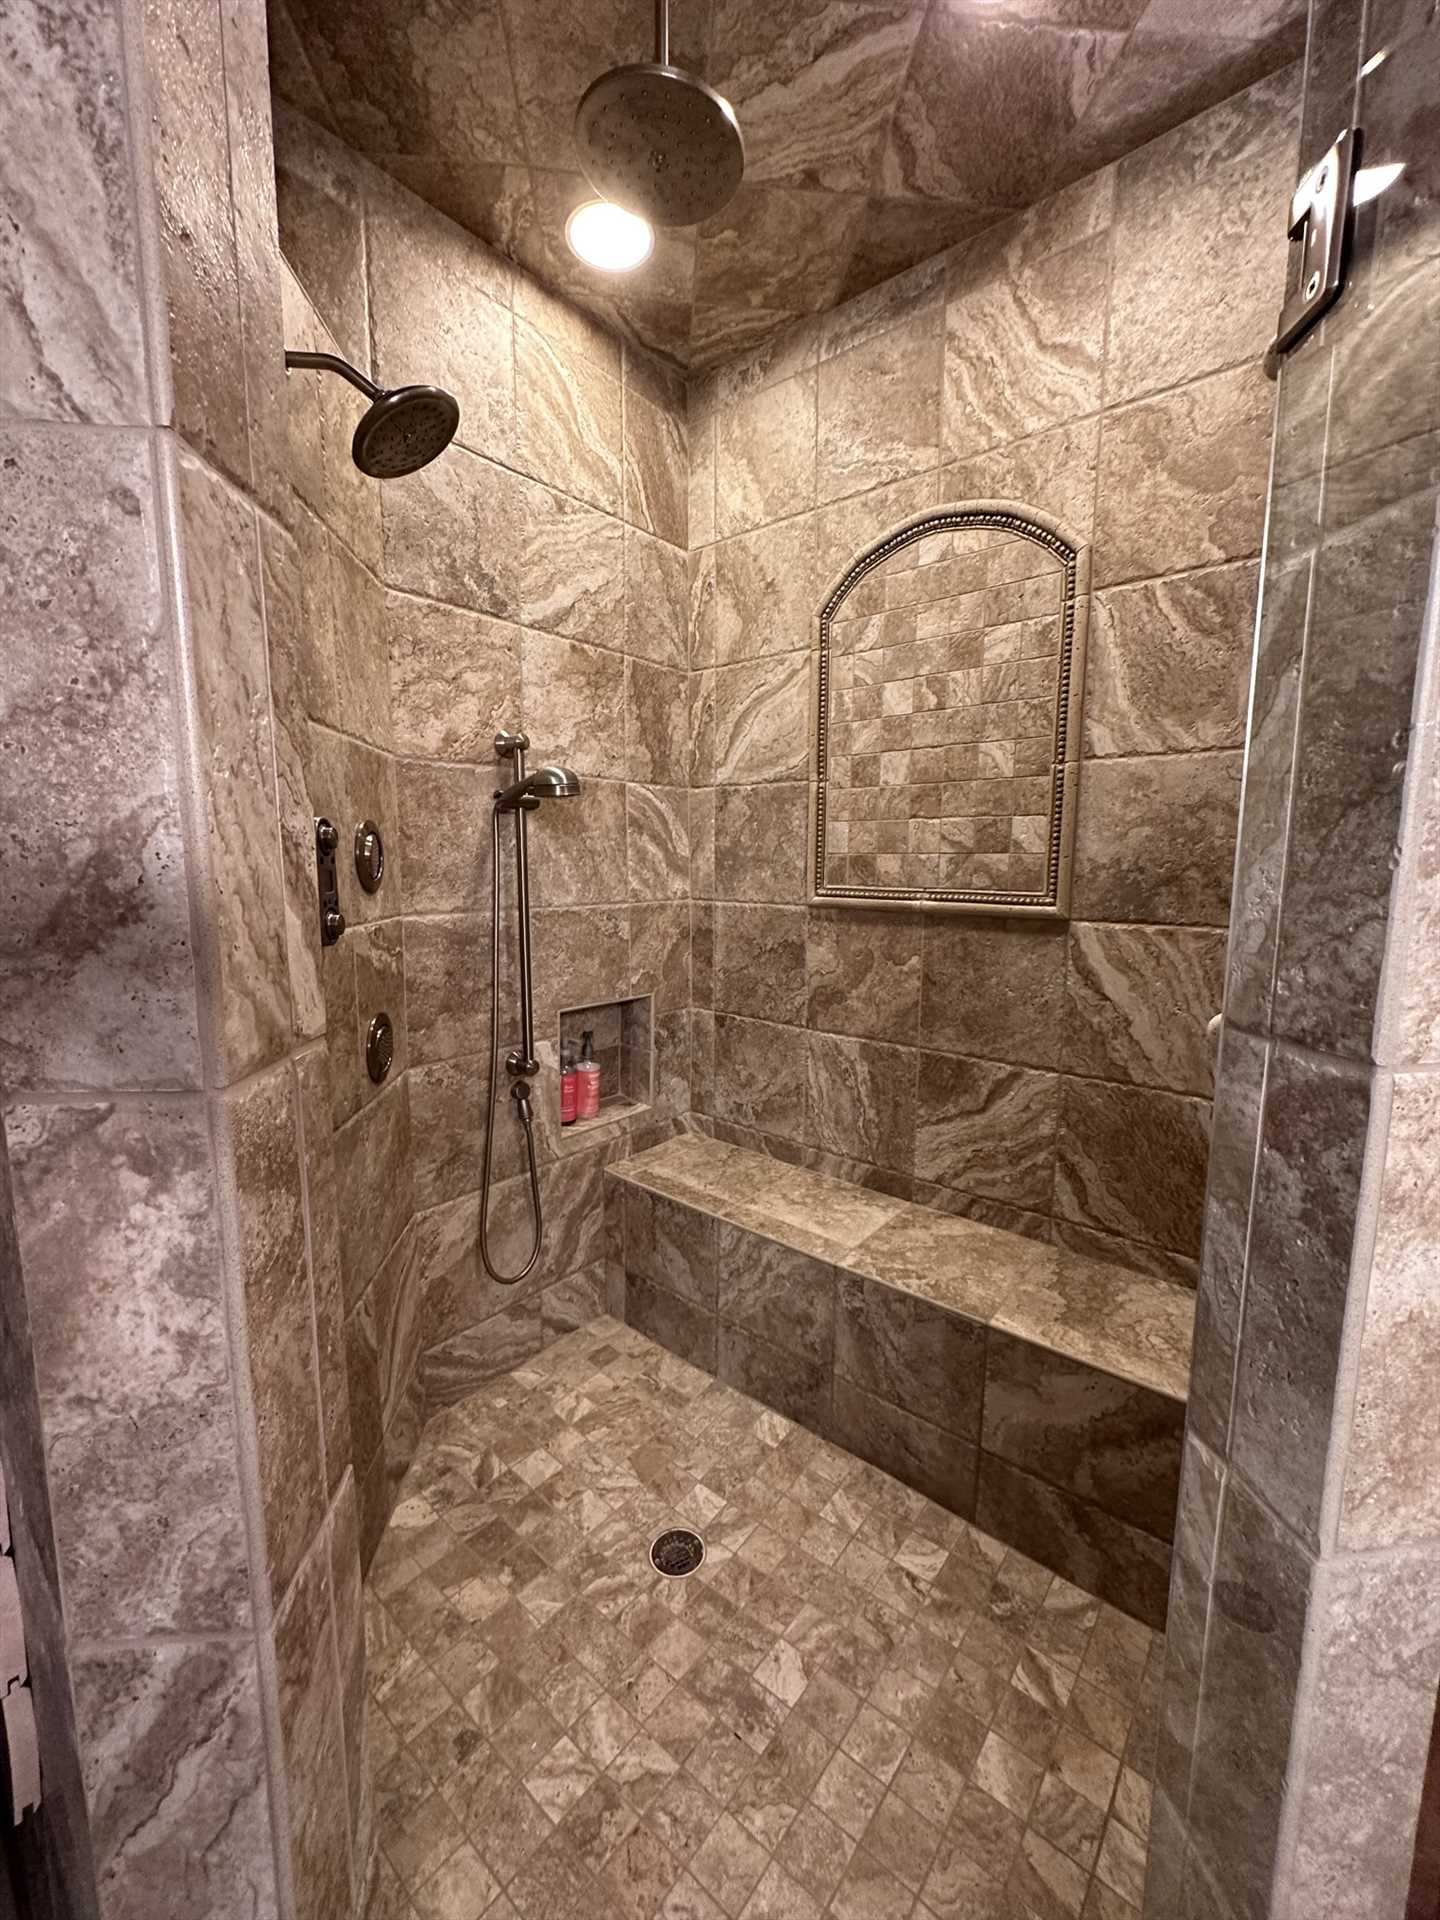                                                 No bumping your elbows during cleanup time when you step into the master suite's enormous shower stall!